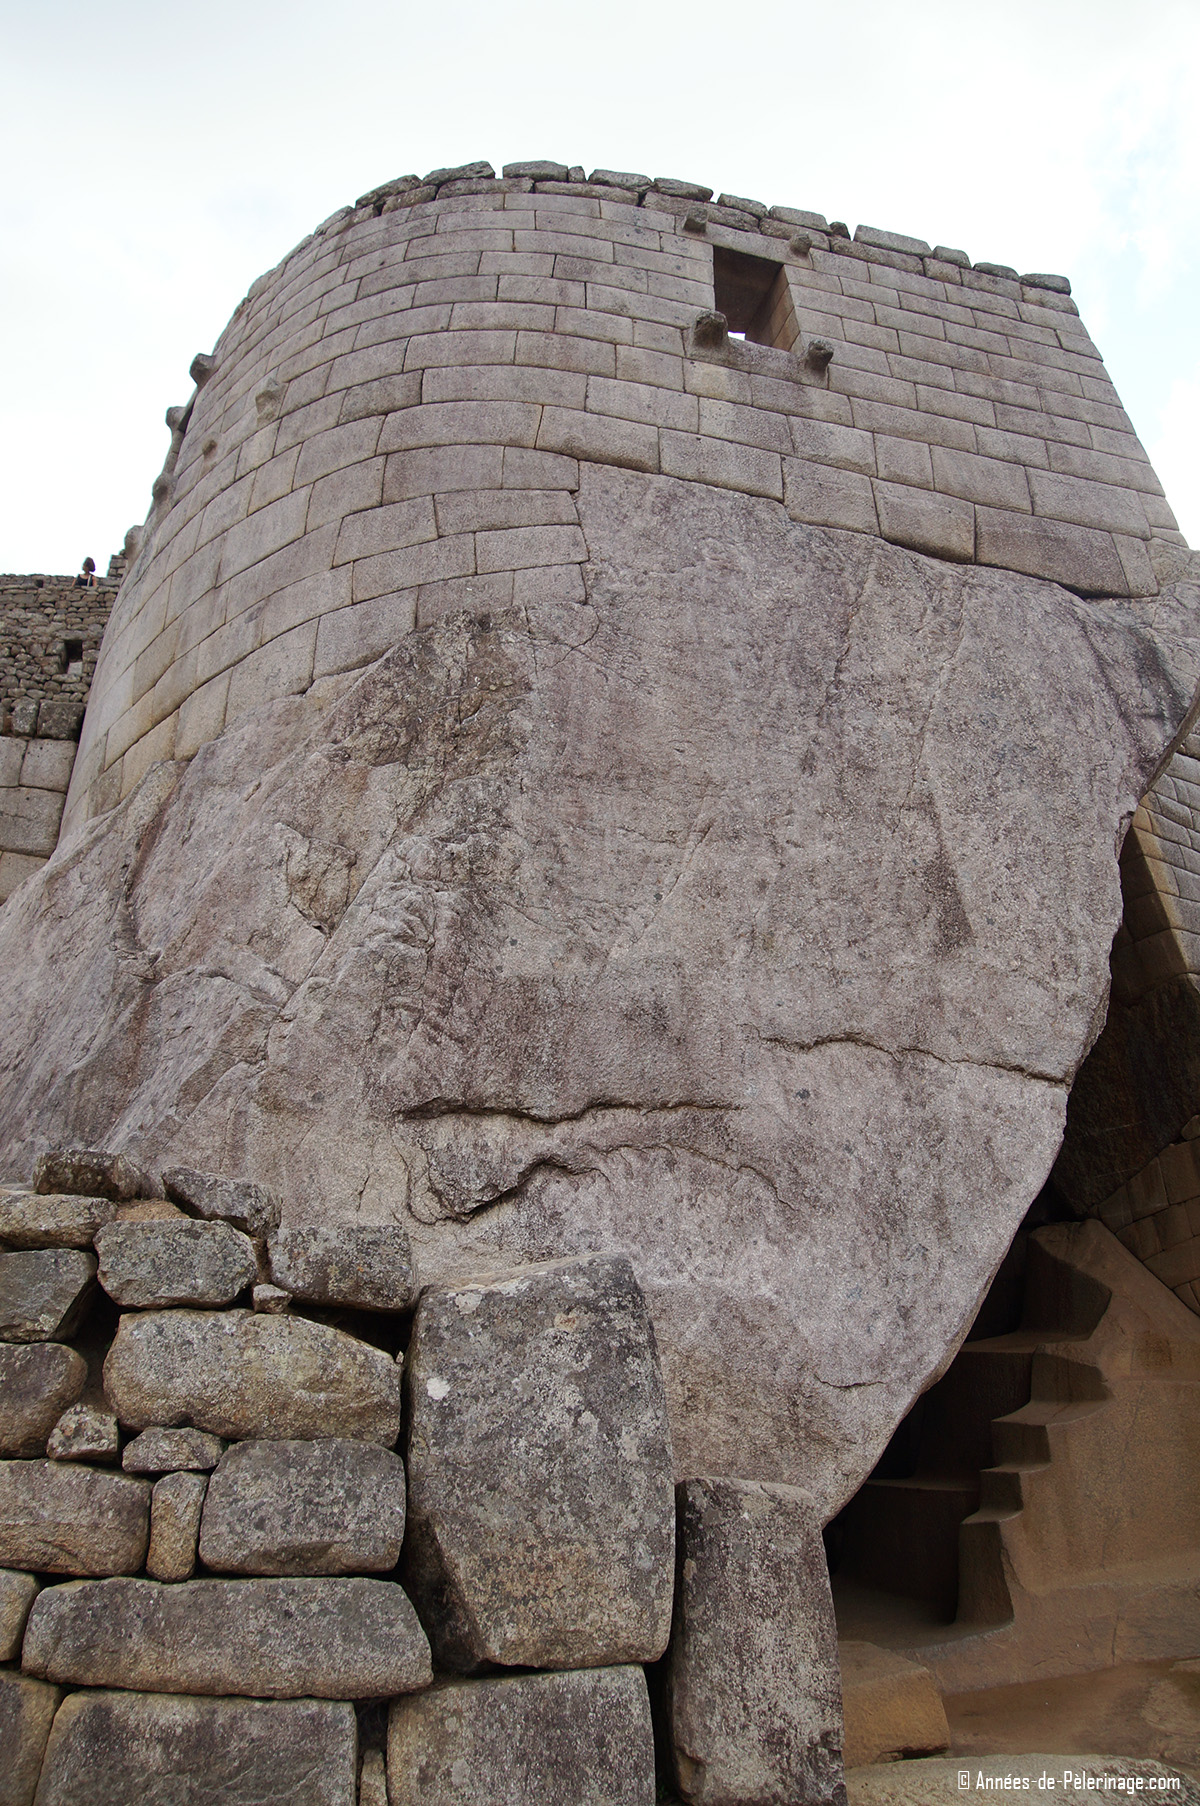 The temple of the Sun inside Machu Picchu with the royal tomb visible below. Unlike the rest of Machu Picchu architecture this structure has round walls